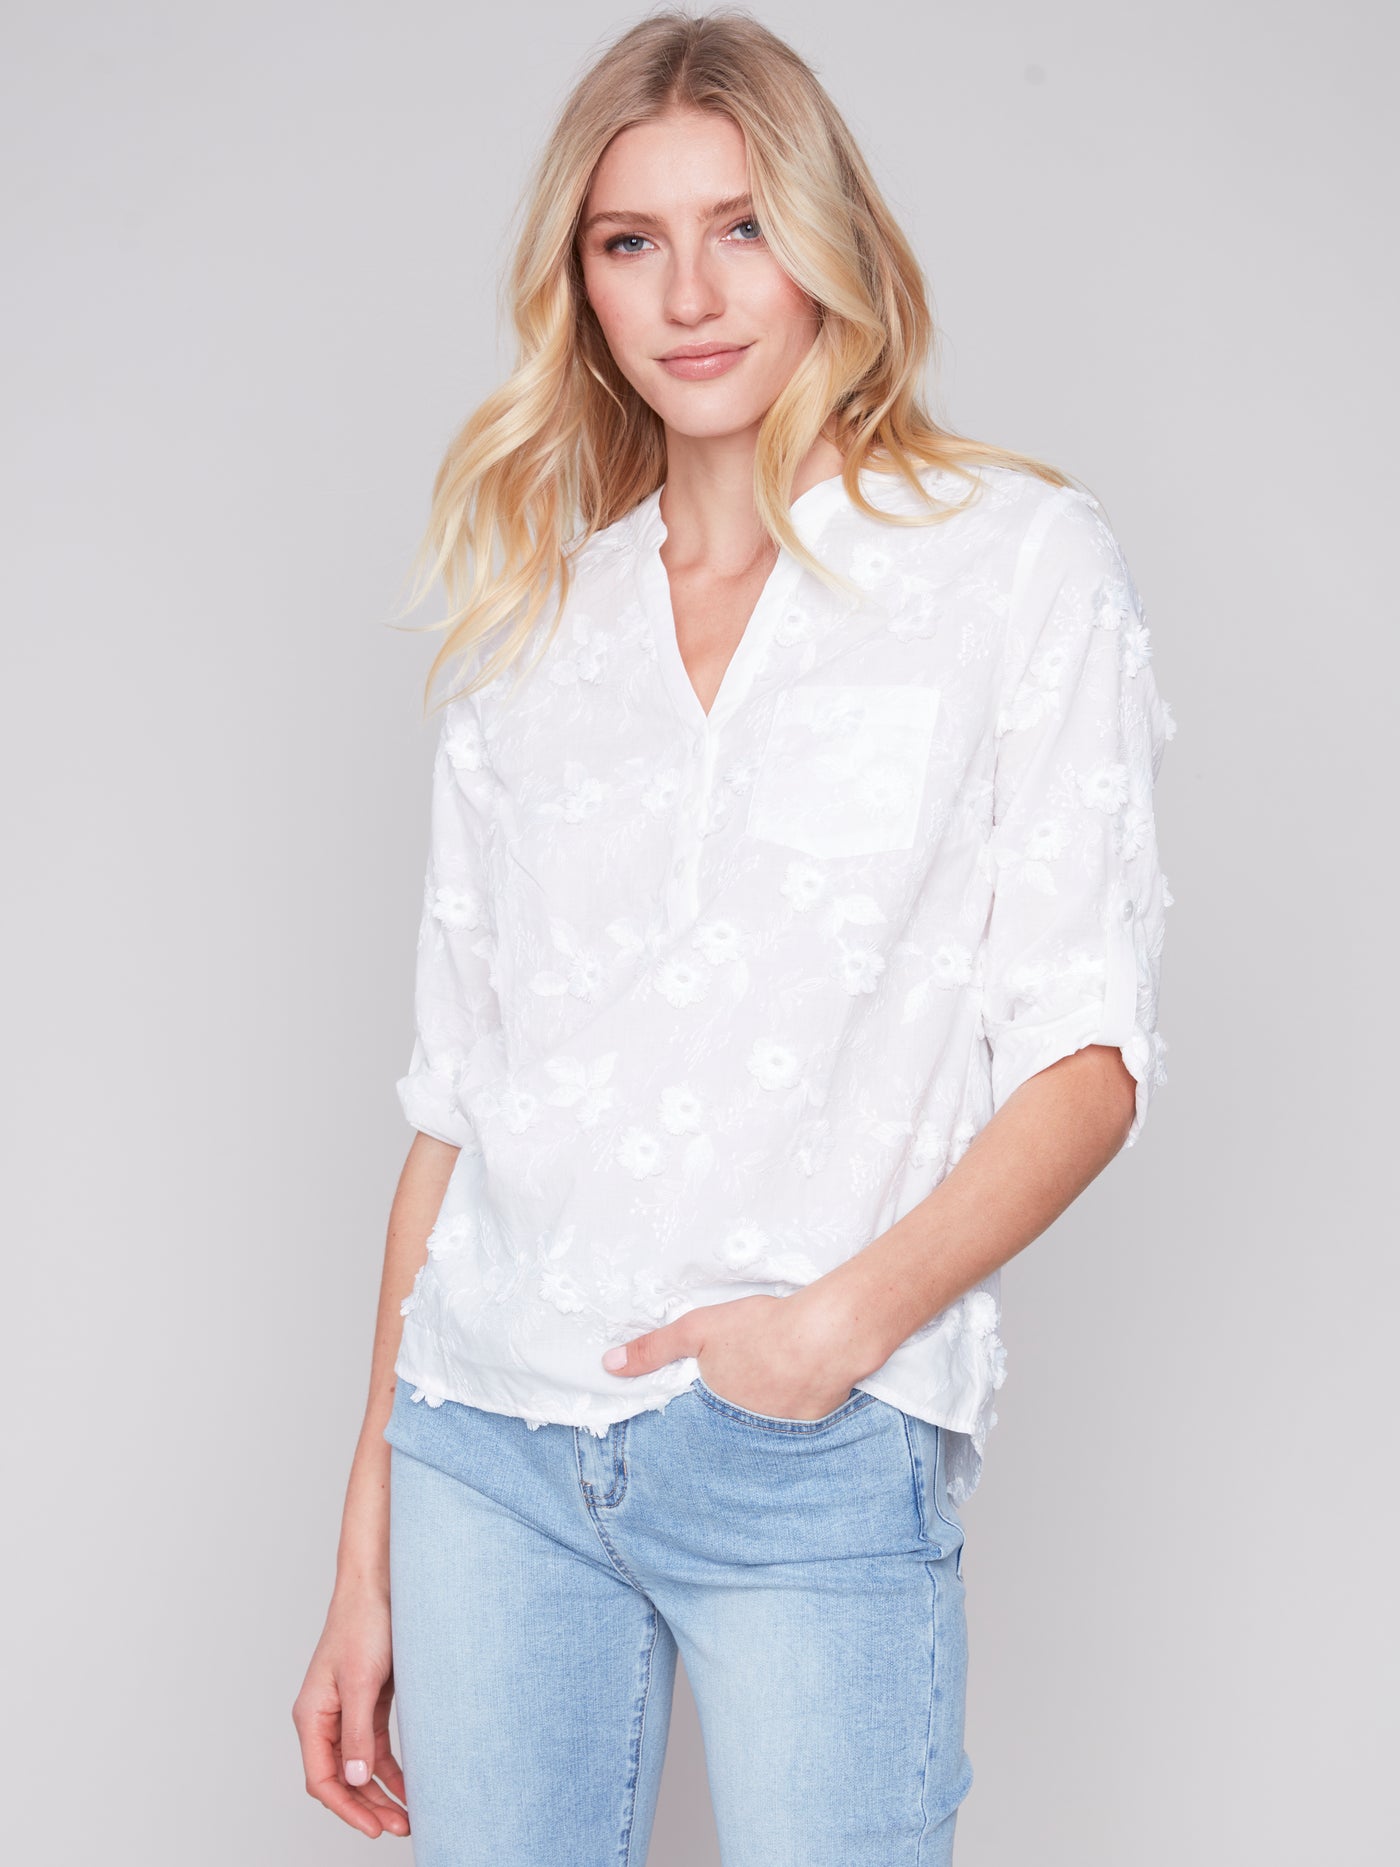 Blouse with Embroidery Fabric in Blanc White